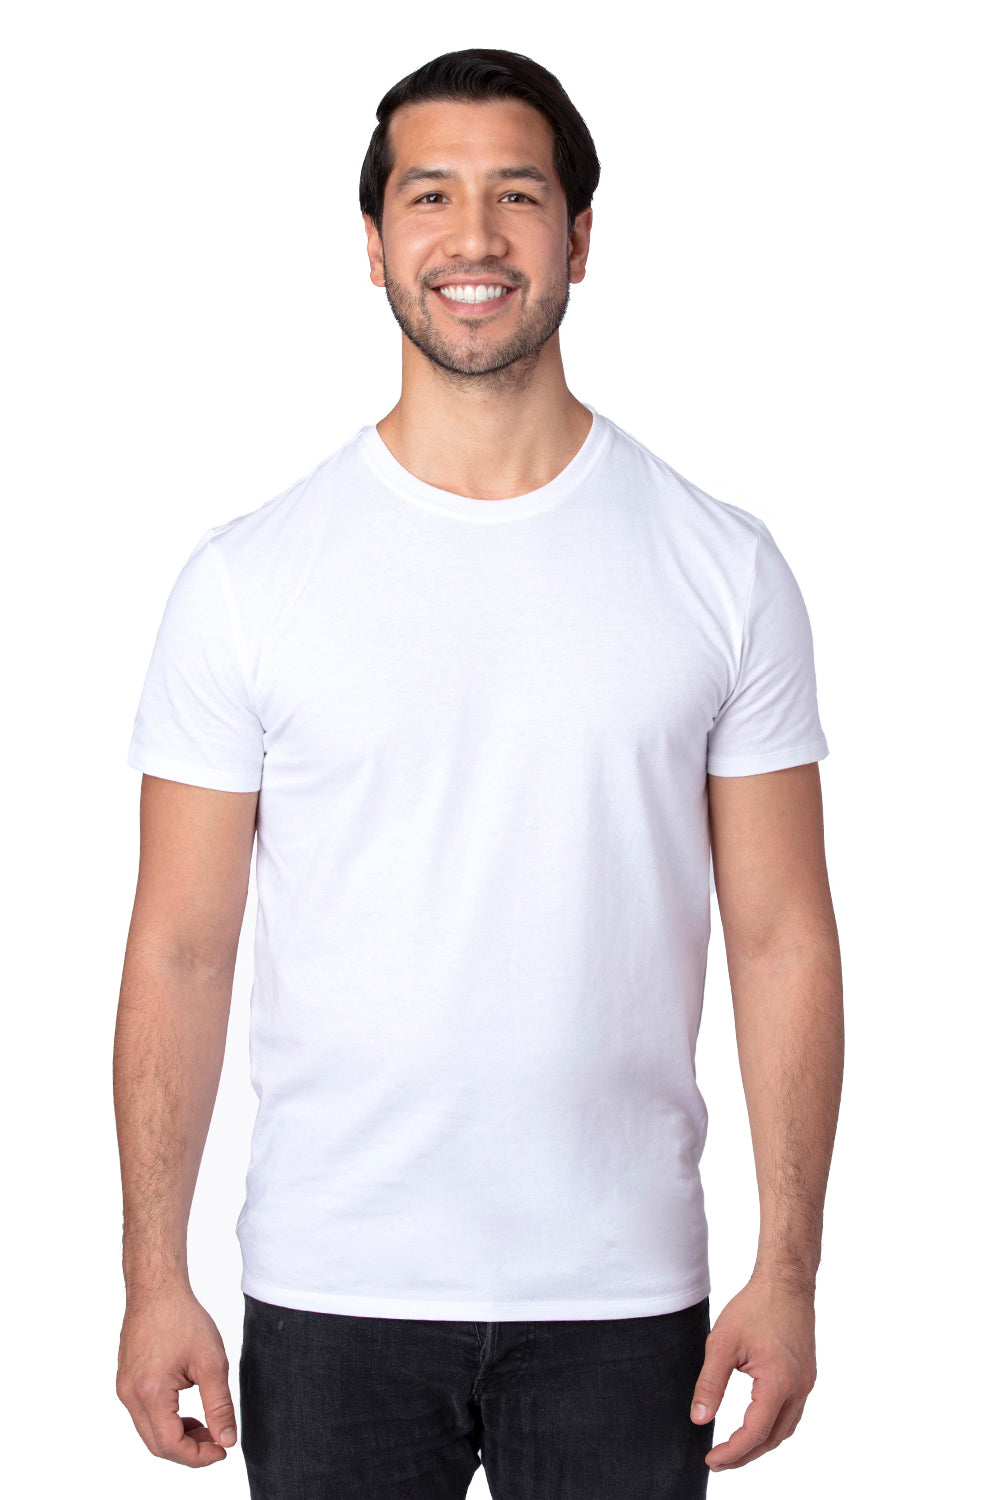 Threadfast Apparel 100A Mens Ultimate Short Sleeve Crewneck T-Shirt White Front